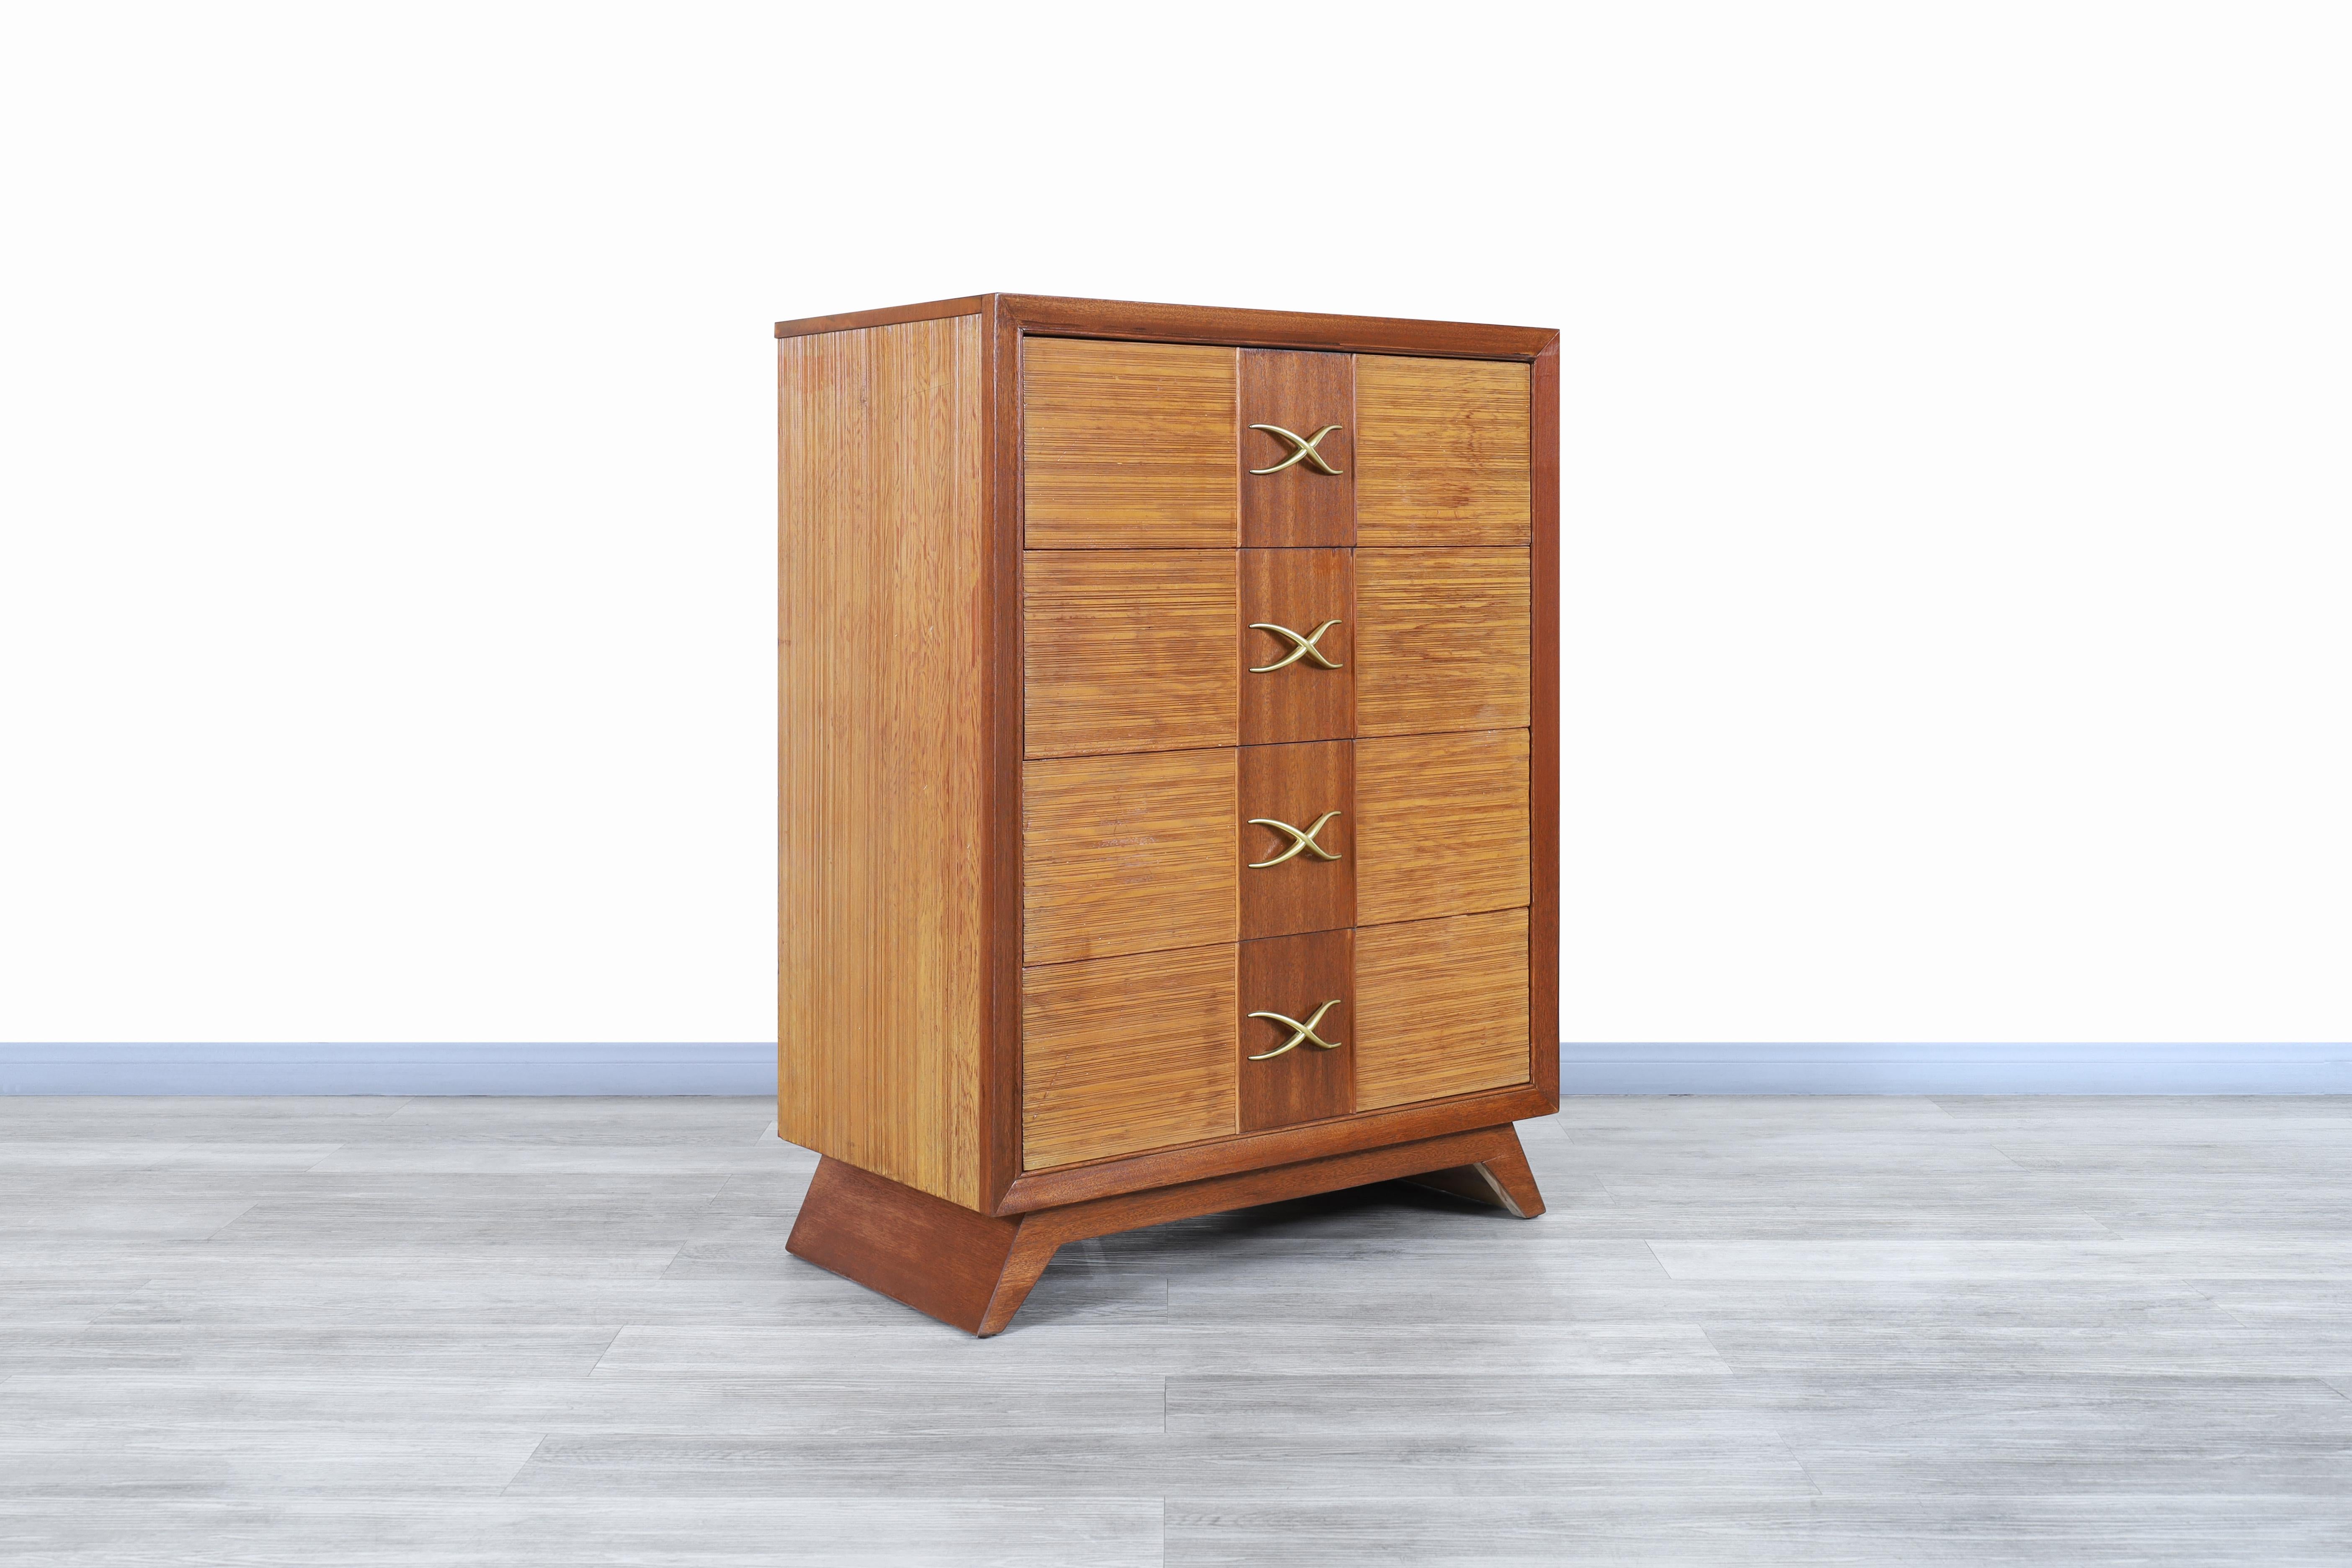 Stunning vintage oak and brass chest of drawers / tall dresser designed by Paul Frankl for Brown Saltman, circa 1950s. This beautiful chest of drawer’s features a Minimalist but highly functional design that highlights the elegance of the oak wood